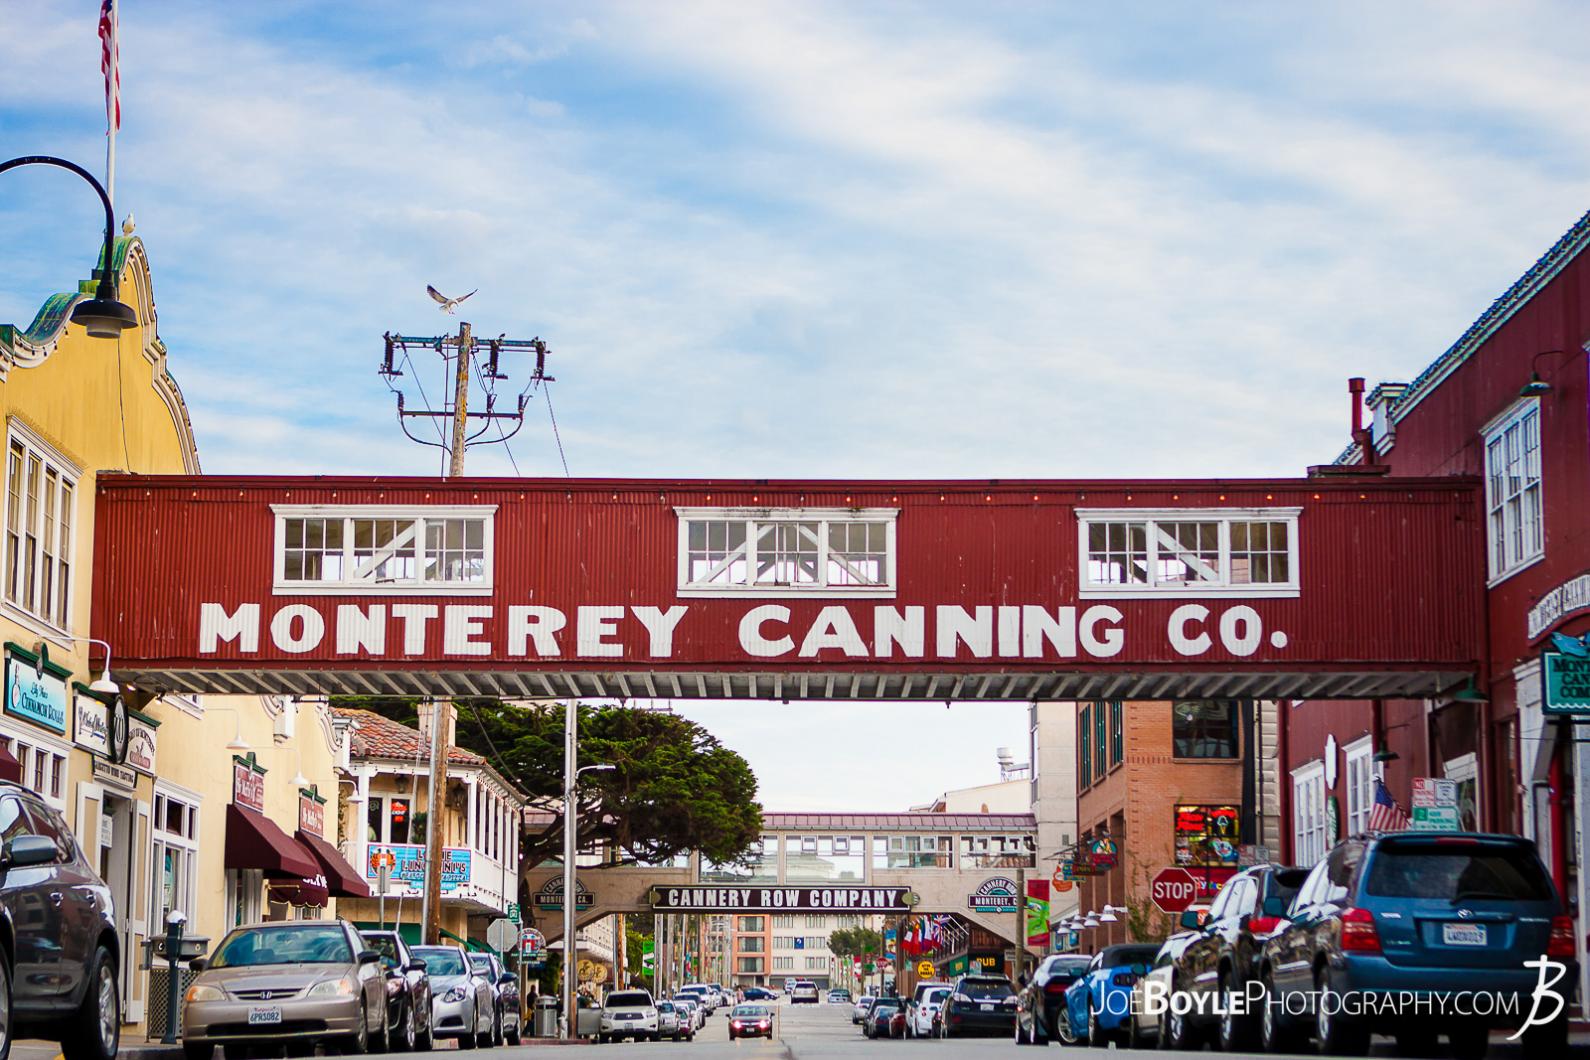 I was so excited to visit Cannery Row on my visit to Monterey California! I had recently finished reading East of Eden by John Steinbeck and was eager to visit places where he grew up.